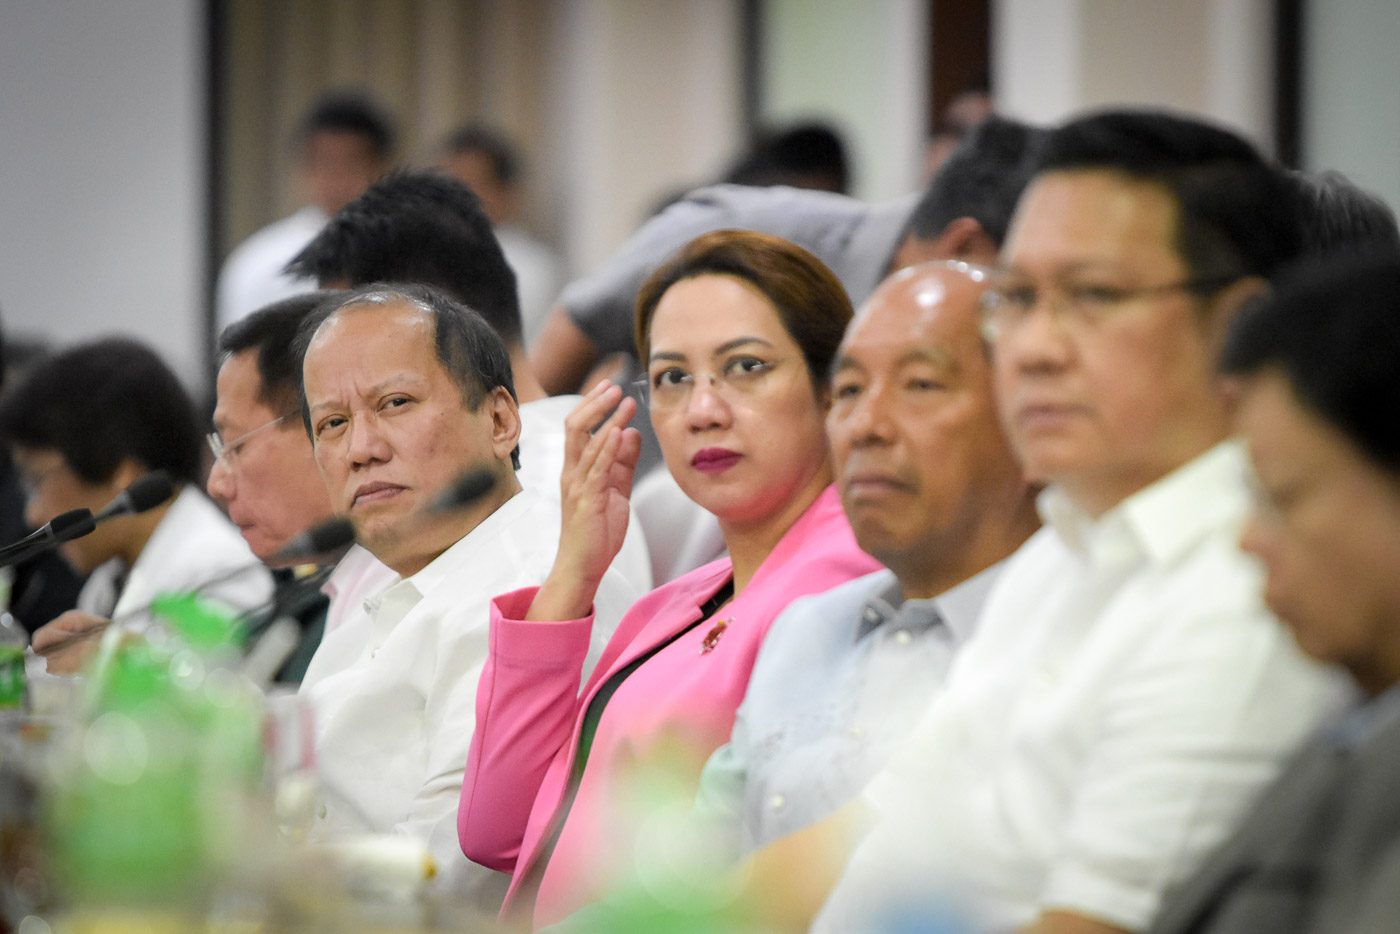 NBI recommends charges vs Aquino, Garin, Abad over Dengvaxia mess